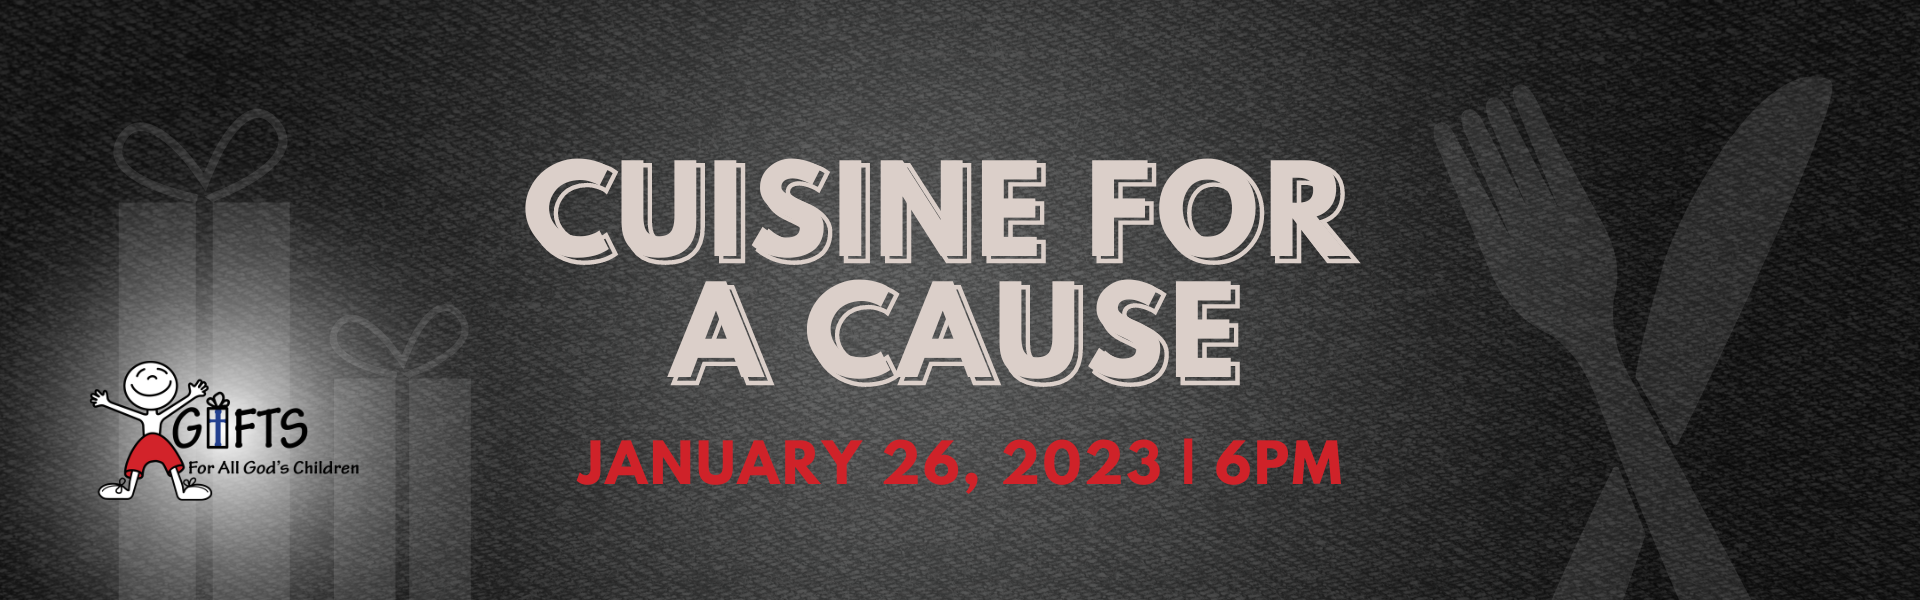 Cuisine for a Cause Banner